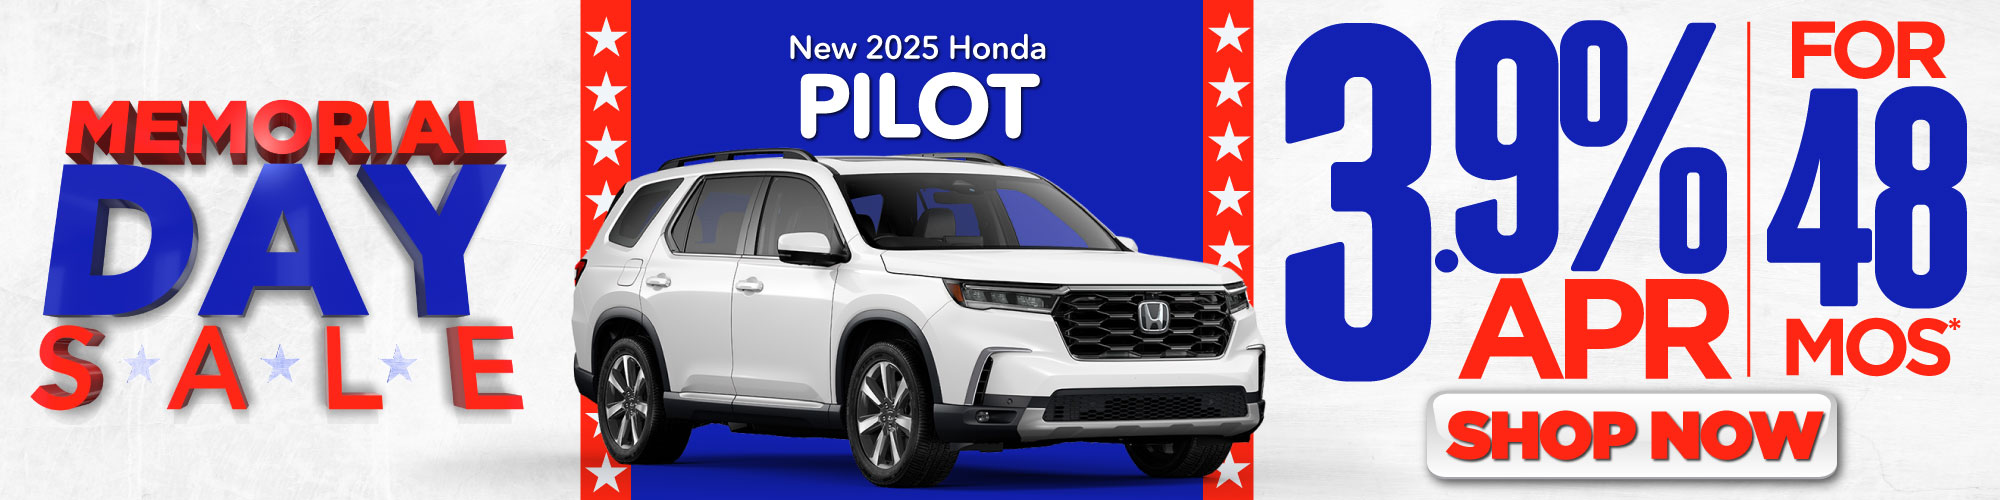 New 2023 Honda Civic or HR-V or Odyssey or CR-V | As Low as 3.9% APR for up to 48 mos* | Act Now